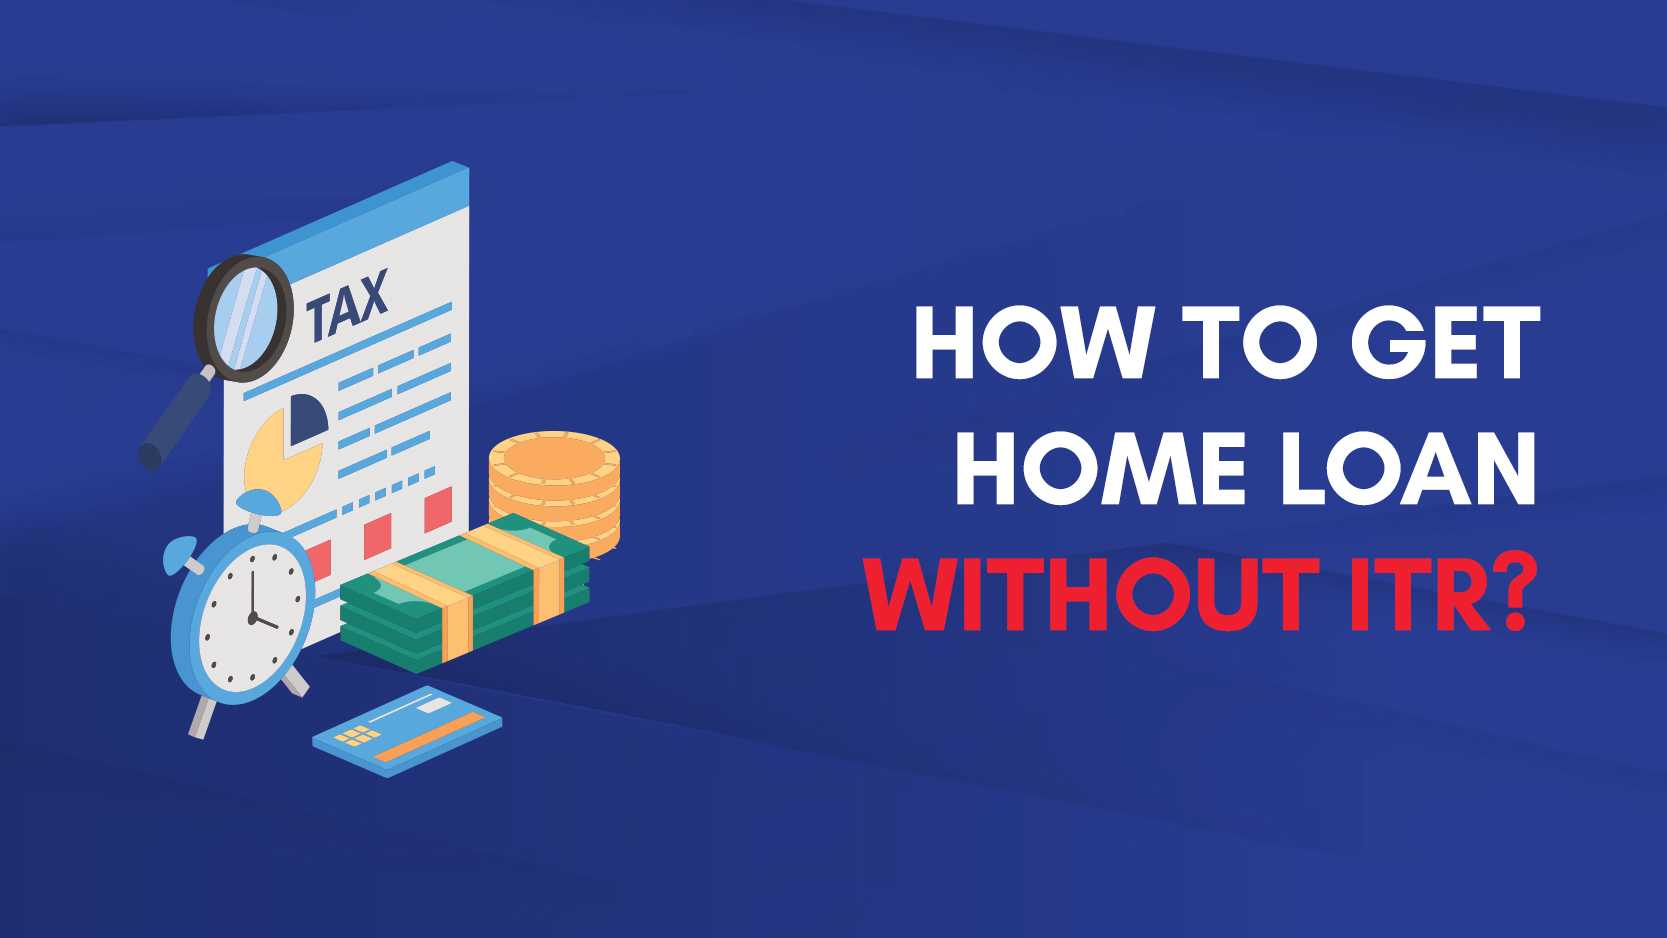 HOW TO GET
HOME LOAN